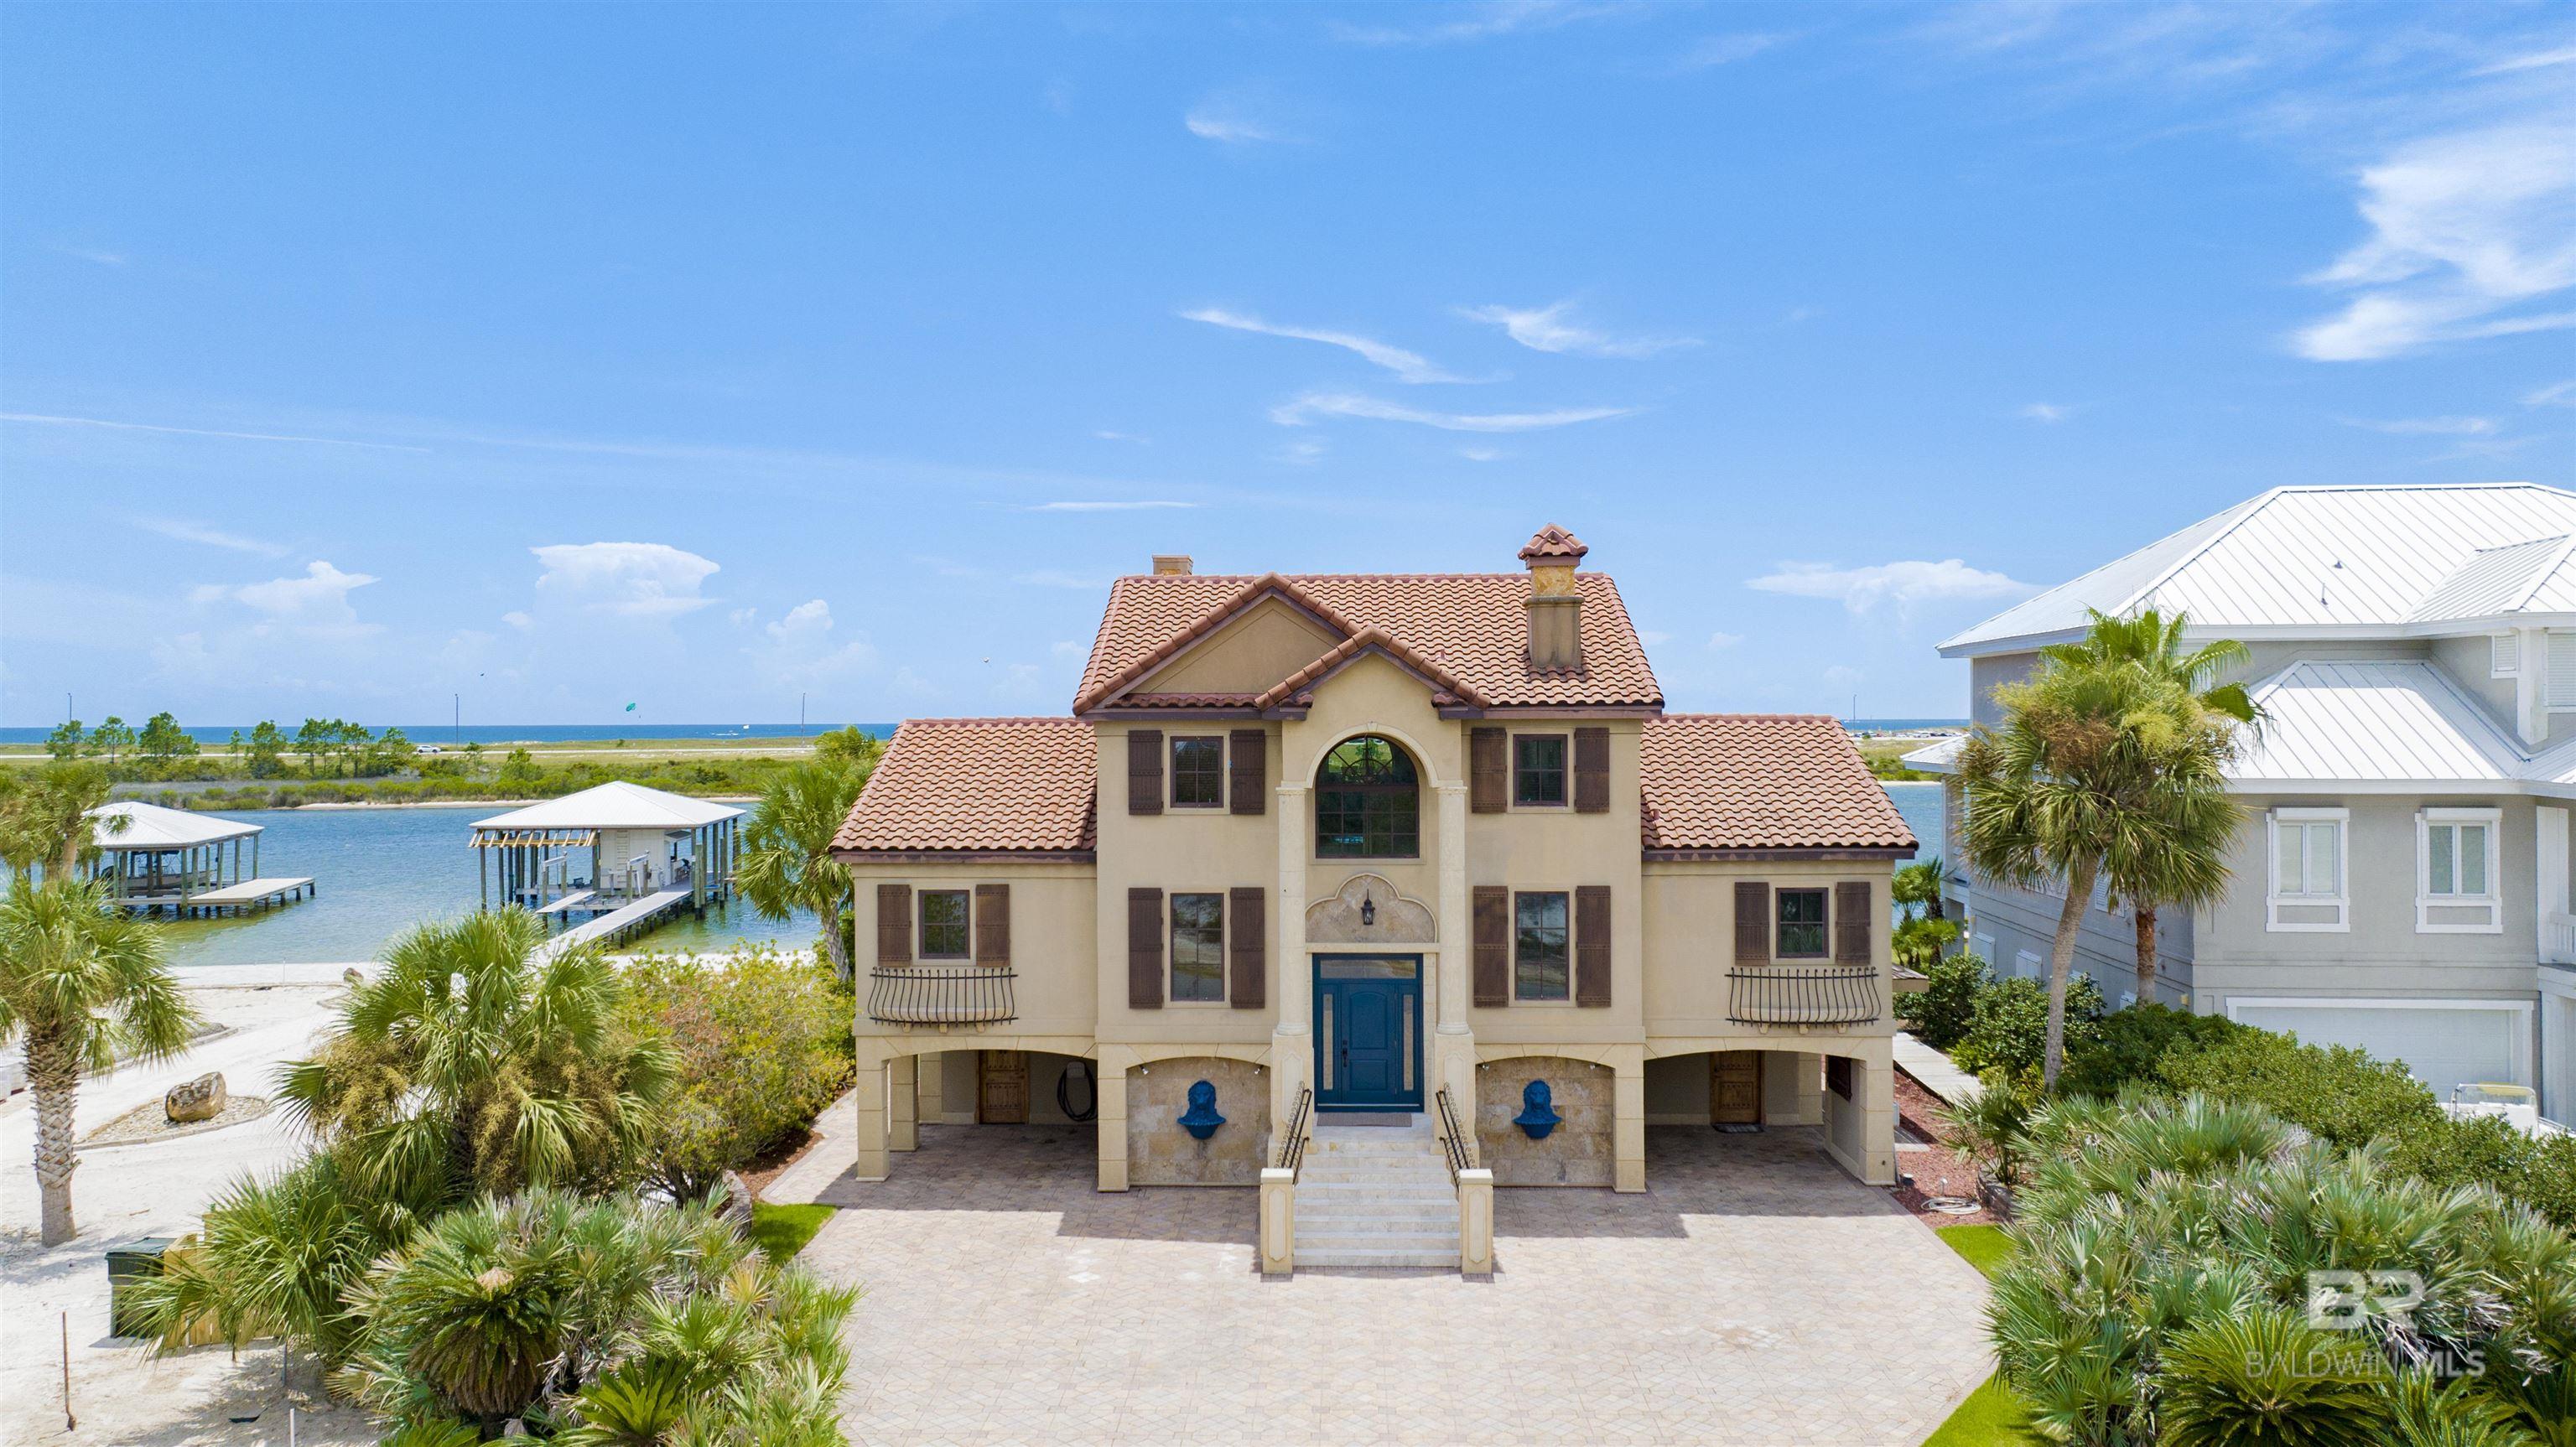 This BEAUTIFUL unique Mediterranean Ono Island home is a boater’s paradise!  It's perfectly situated on over 100 feet of pristine water frontage. Offers unobstructed and breathtaking views of Ole River and the Gulf of Mexico. The home is conveniently located at the west end of the Island! Home is very close to the Ono bridge and to Perdido Pass. For those with large boats, the home offers no-wake deep water access and a 75'+/- slip capable of 70 feet in length. Situated on the west side of Ono Island bridge. Any size sport fishing towers will have no issue traveling to and from the Gulf.  Lots of space to entertain and relax with family and friends! This beautiful castle style home has lots of potential to make it your own style. It has seventeen-foot ceilings in the living room,  large crown molding, beautiful Iron work, an elevator, impact glass windows, a brick-paved driveway, two spacious covered outdoor areas, a white-sand beach, new seawall, and ThruFlow decking on the pier. The house has two water front master suites with the primary master suite offering a fireplace, wet bar, double vanity, his and her walk-in closets, a tiled walk-in shower, and a jetted tub. The home also has two spacious entertainment areas providing a combination of wet bars, bar seating, built-in wine racks, an lots of cabinet space, refrigerators, an ice-maker, and expansive water views. The home’s kitchen has granite countertops, a tiled backsplash, stainless steel appliances, a built-in refrigerator, two built-in ovens, a microwave drawer, under-cabinet lighting. This home is a MUST SEE!!